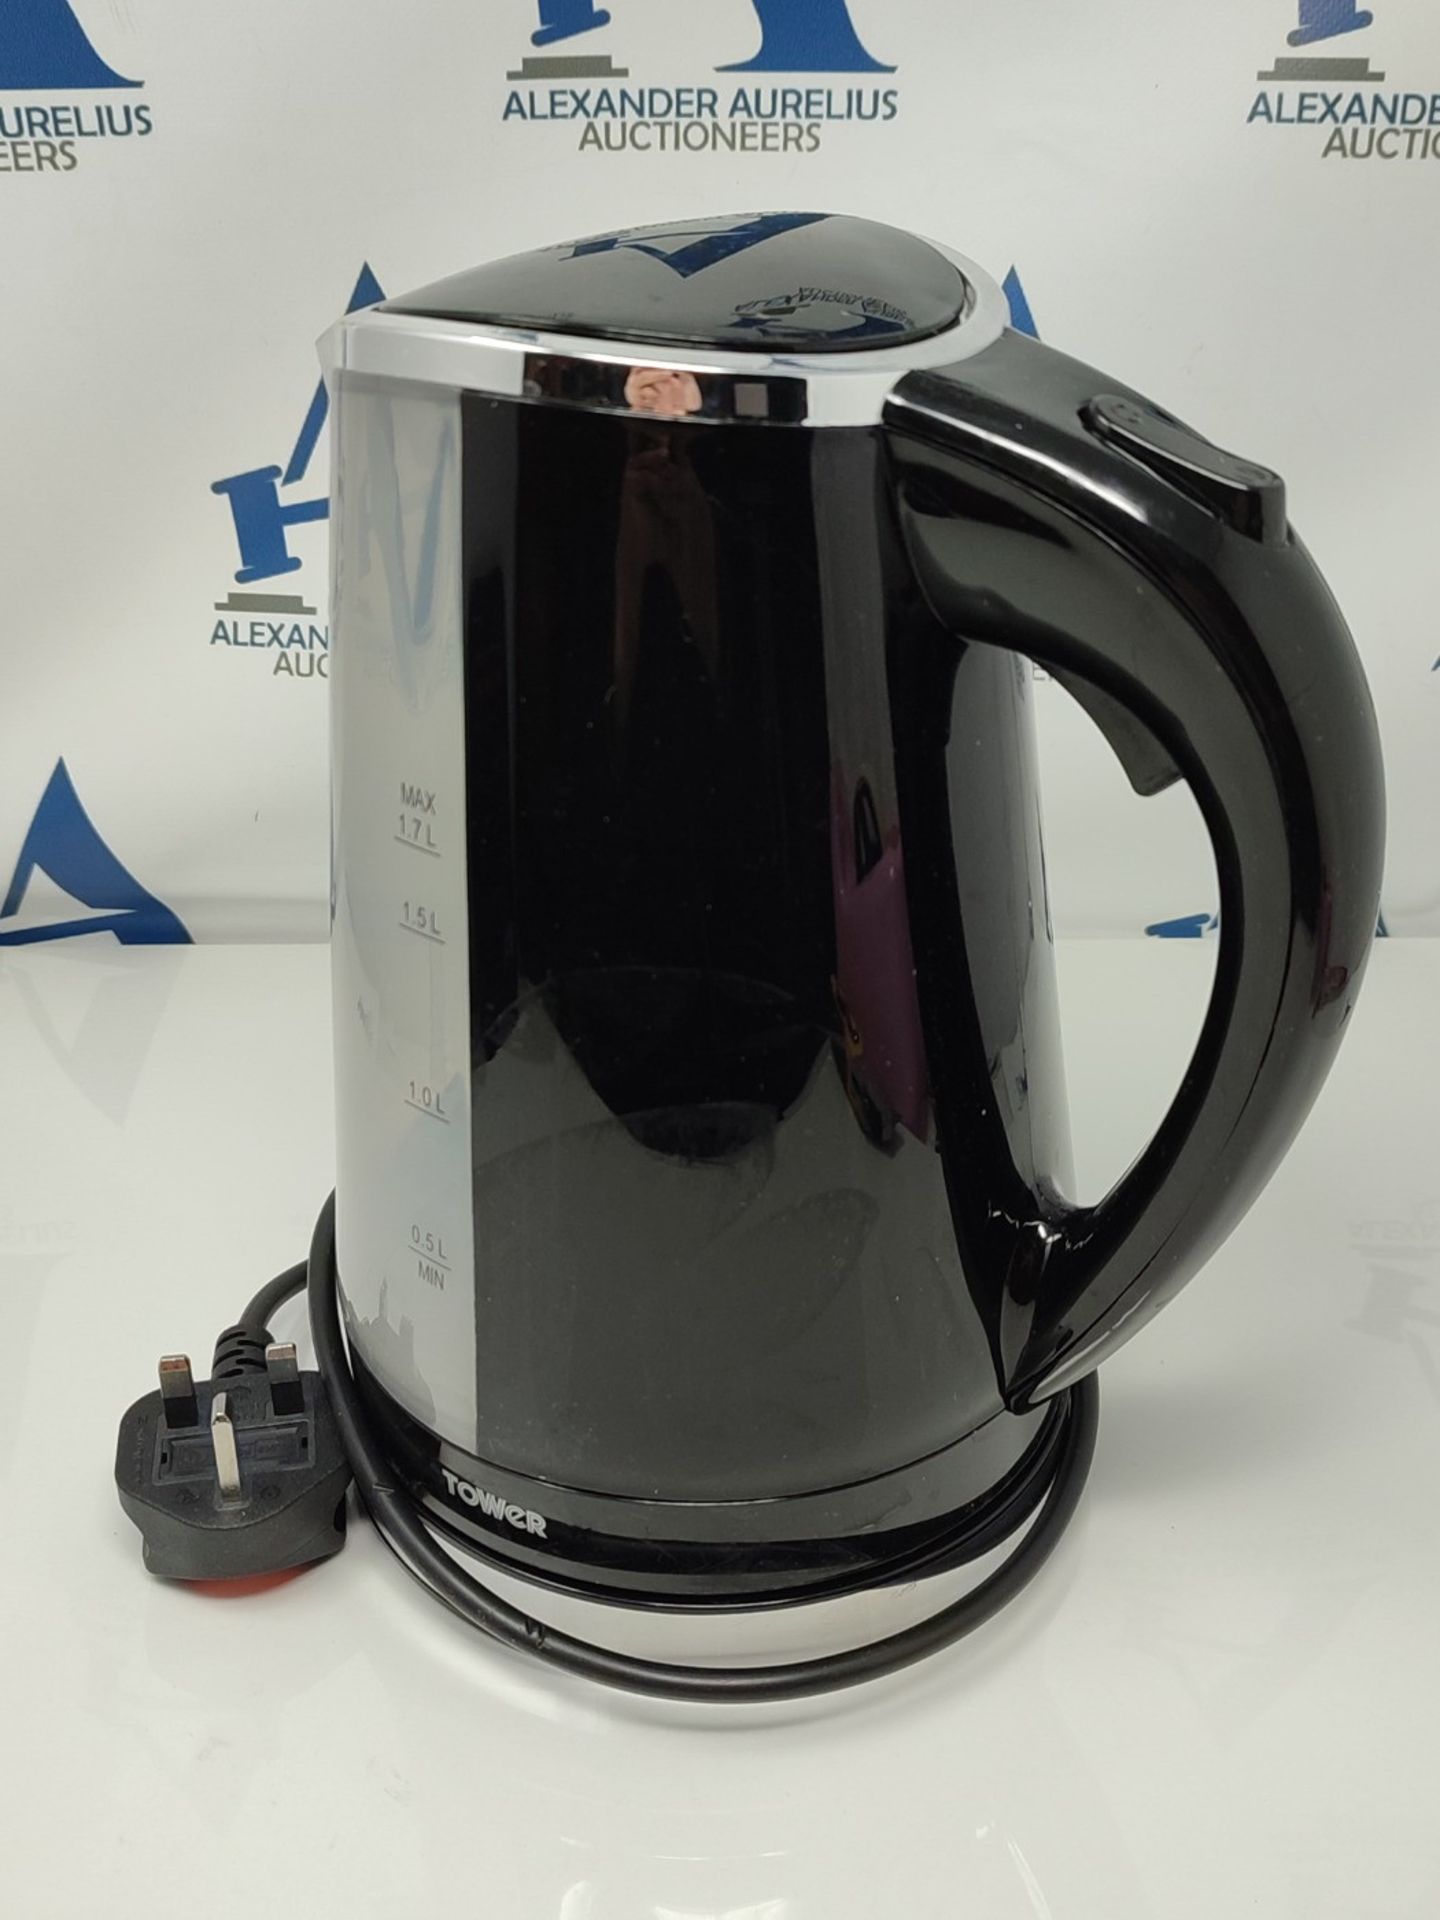 Tower T10012 LED Colour Changing Kettle, 1.7L, 2200W, Black - Image 2 of 2